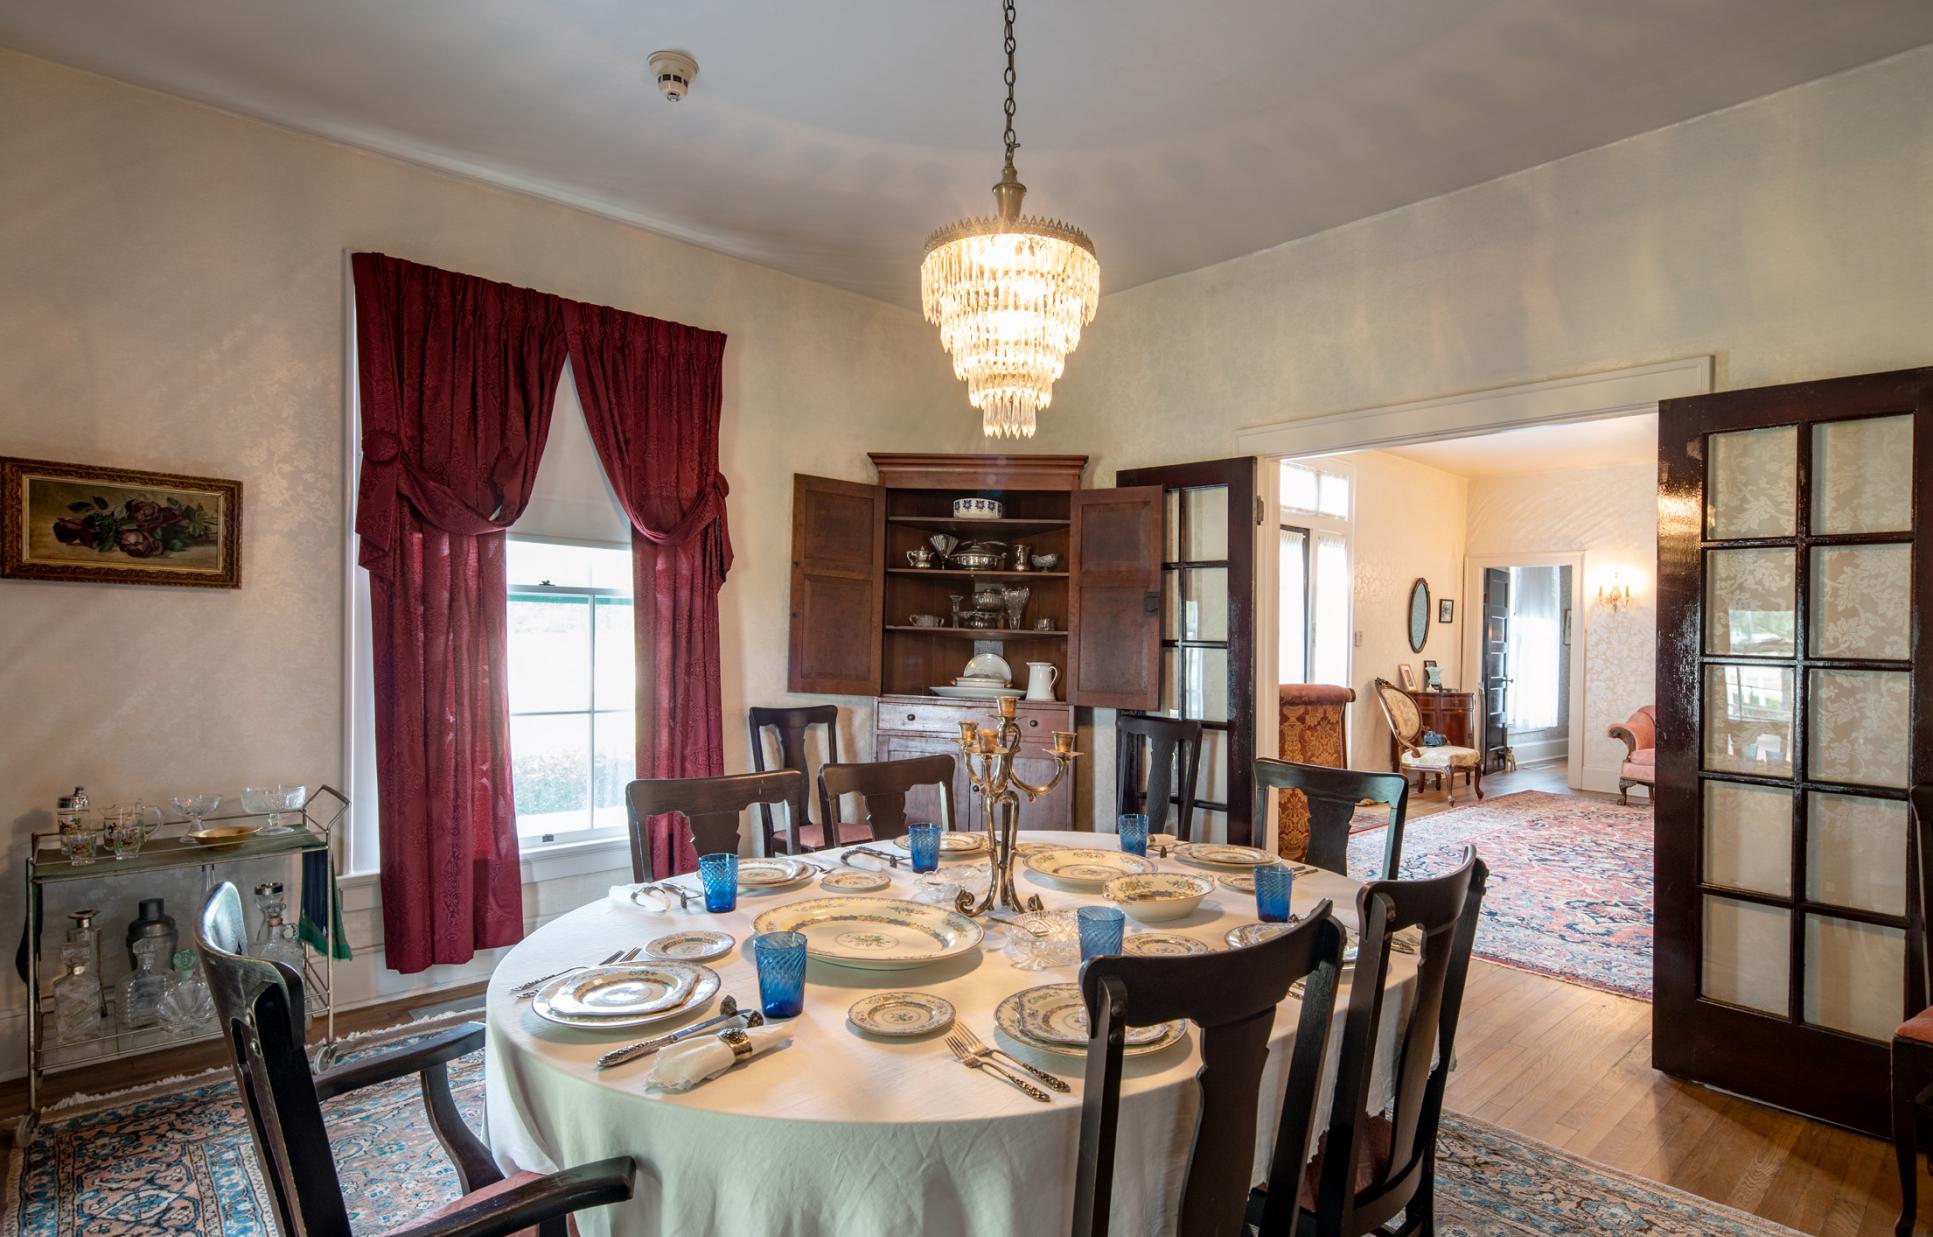 Main dining room in the Sam Rayburn House